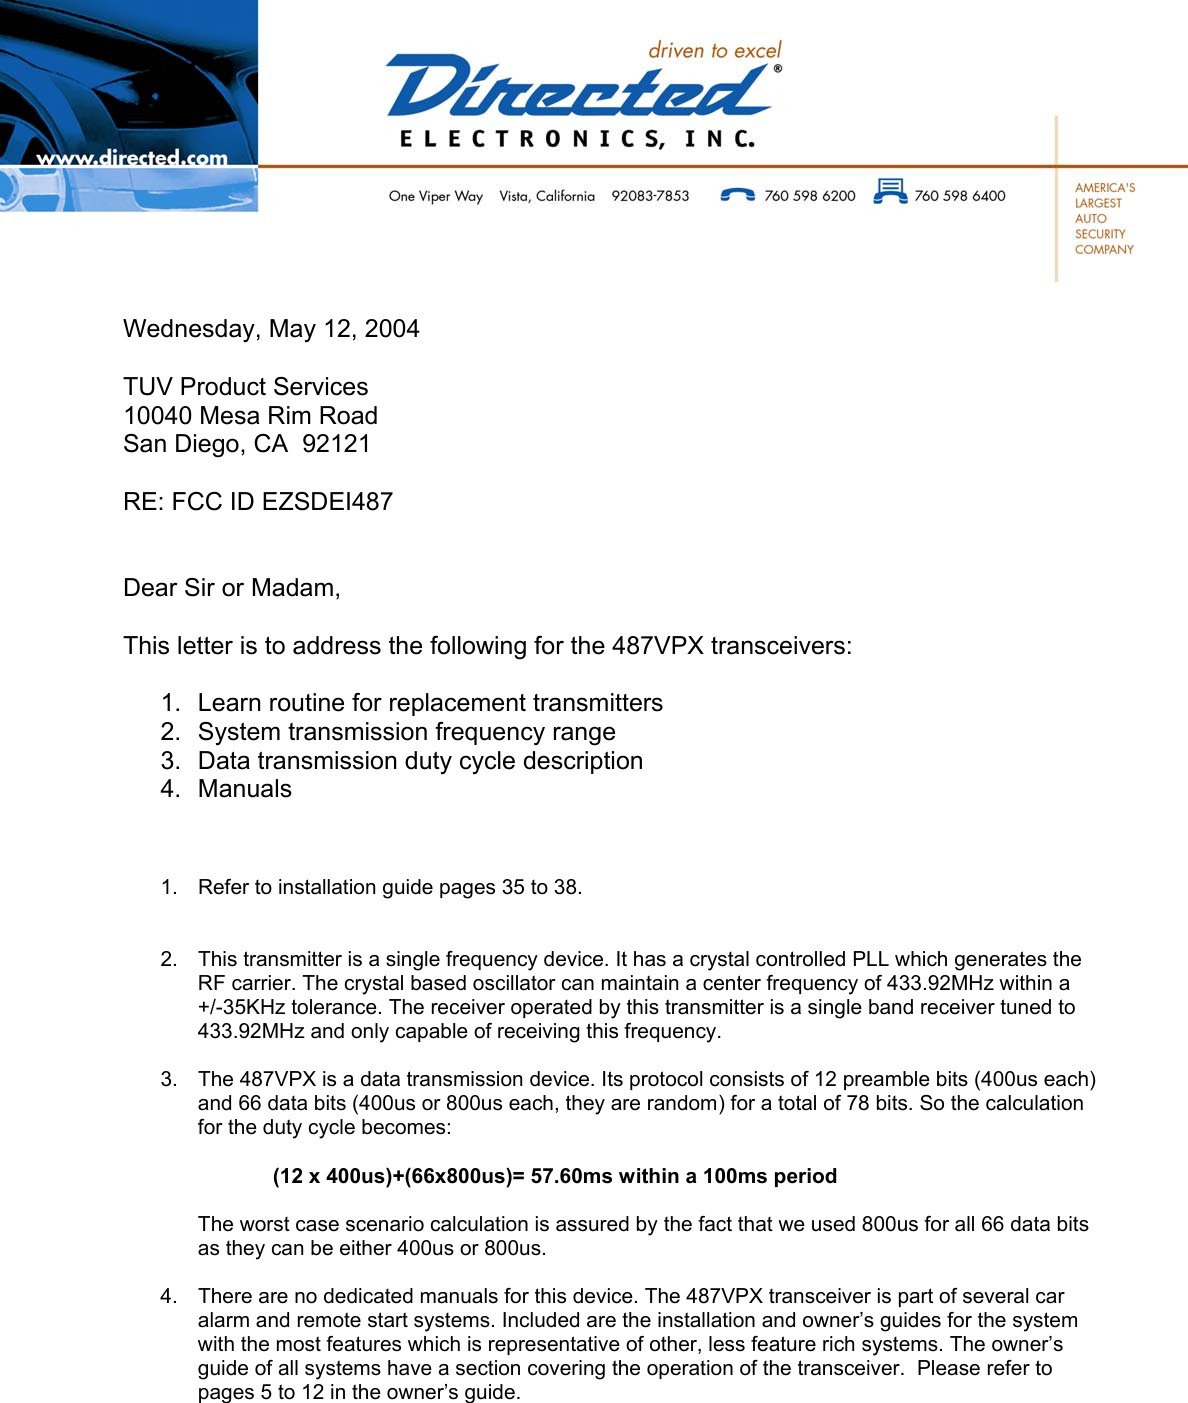          Wednesday, May 12, 2004  TUV Product Services 10040 Mesa Rim Road San Diego, CA  92121  RE: FCC ID EZSDEI487   Dear Sir or Madam,  This letter is to address the following for the 487VPX transceivers:   1.  Learn routine for replacement transmitters 2.  System transmission frequency range 3.  Data transmission duty cycle description 4. Manuals    1.  Refer to installation guide pages 35 to 38.   2.  This transmitter is a single frequency device. It has a crystal controlled PLL which generates the RF carrier. The crystal based oscillator can maintain a center frequency of 433.92MHz within a +/-35KHz tolerance. The receiver operated by this transmitter is a single band receiver tuned to 433.92MHz and only capable of receiving this frequency.  3.  The 487VPX is a data transmission device. Its protocol consists of 12 preamble bits (400us each) and 66 data bits (400us or 800us each, they are random) for a total of 78 bits. So the calculation for the duty cycle becomes:  (12 x 400us)+(66x800us)= 57.60ms within a 100ms period  The worst case scenario calculation is assured by the fact that we used 800us for all 66 data bits as they can be either 400us or 800us.  4.  There are no dedicated manuals for this device. The 487VPX transceiver is part of several car alarm and remote start systems. Included are the installation and owner’s guides for the system with the most features which is representative of other, less feature rich systems. The owner’s guide of all systems have a section covering the operation of the transceiver.  Please refer to pages 5 to 12 in the owner’s guide.    